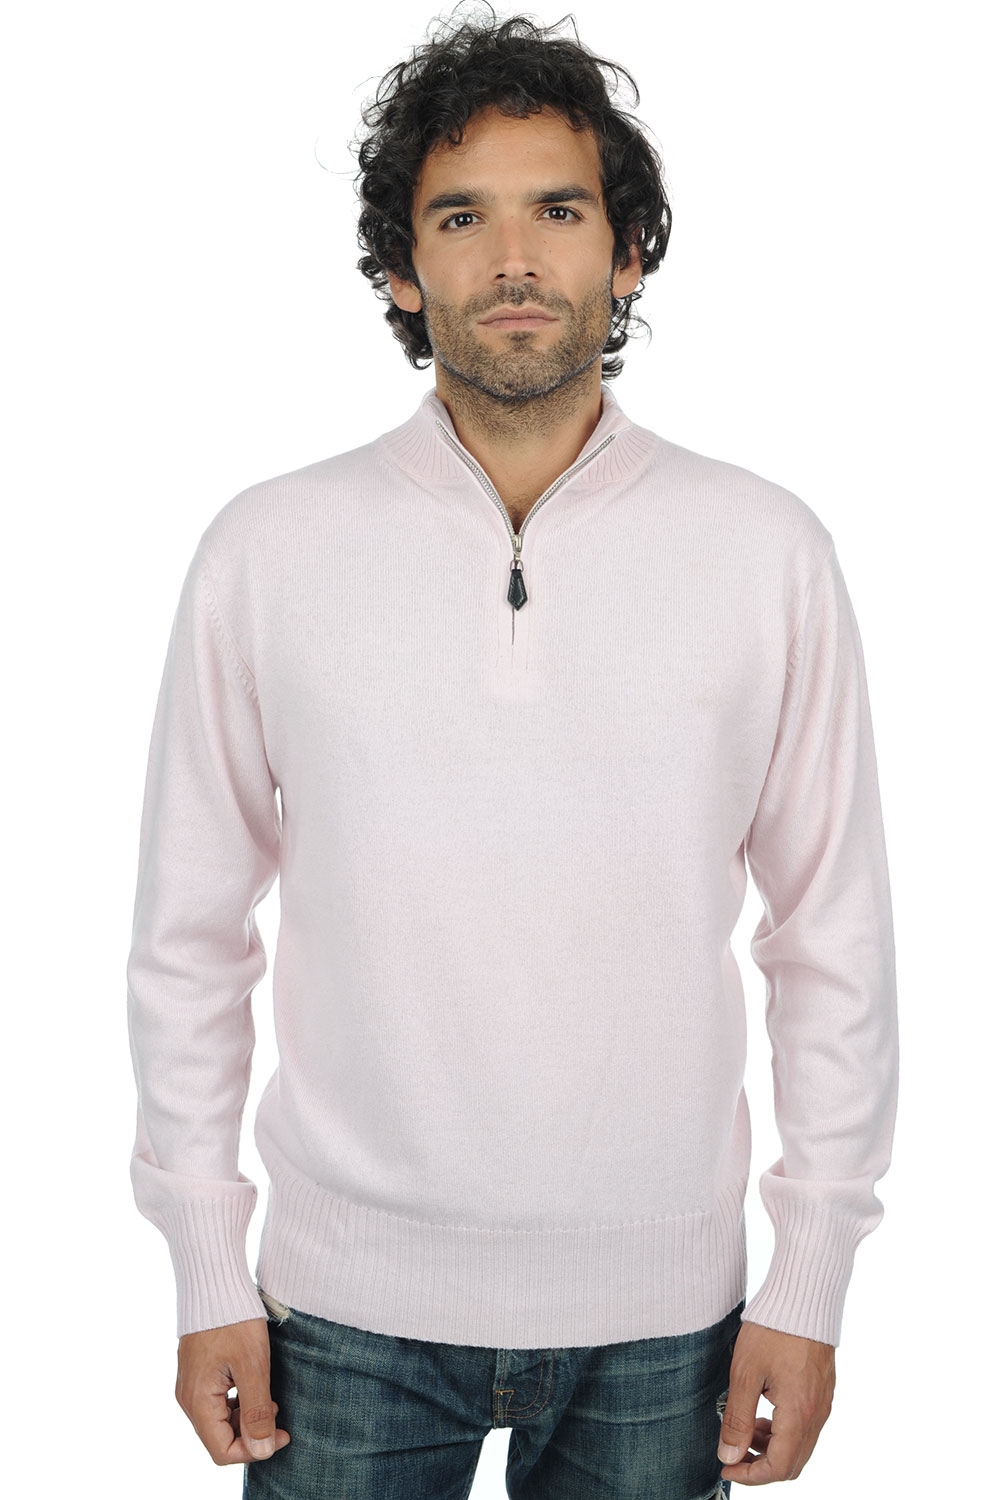 Cashmere men polo style sweaters chazam shinking violet l